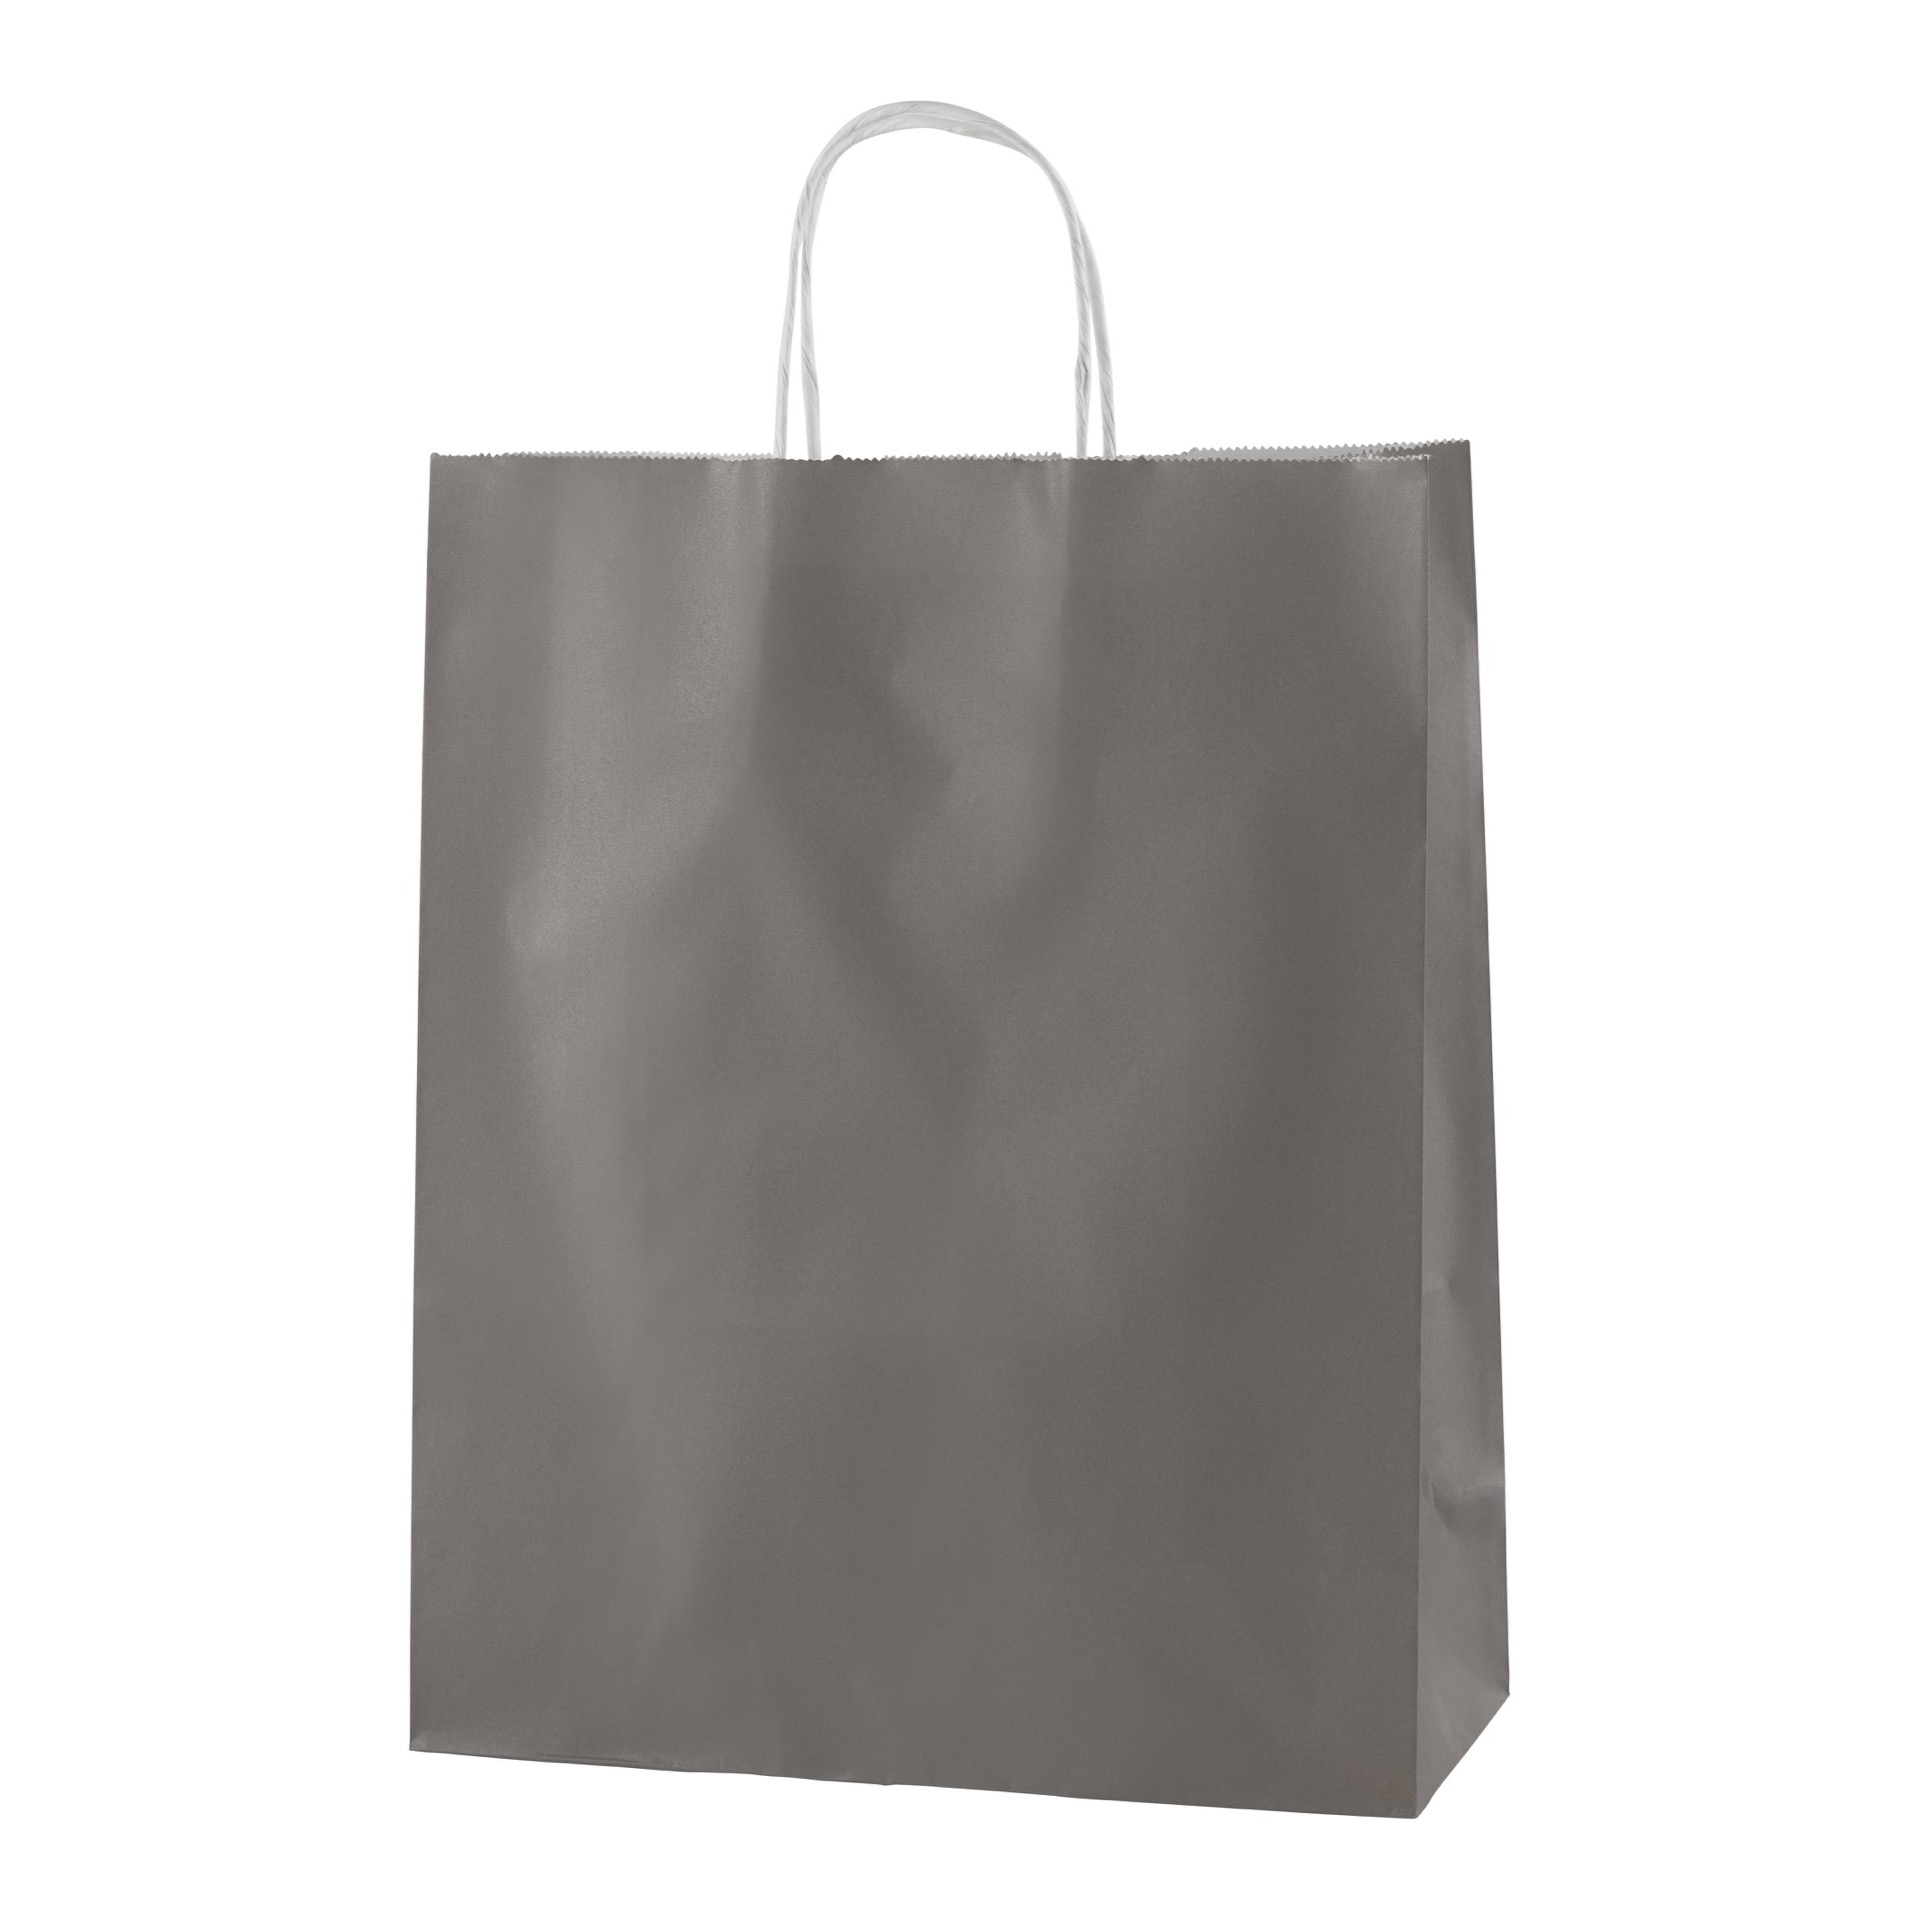 250x110x310mm Medium 10x4.5x12 Thepaperbagstore 30 White Paper Carrier Bags With Strong Twisted Handles 